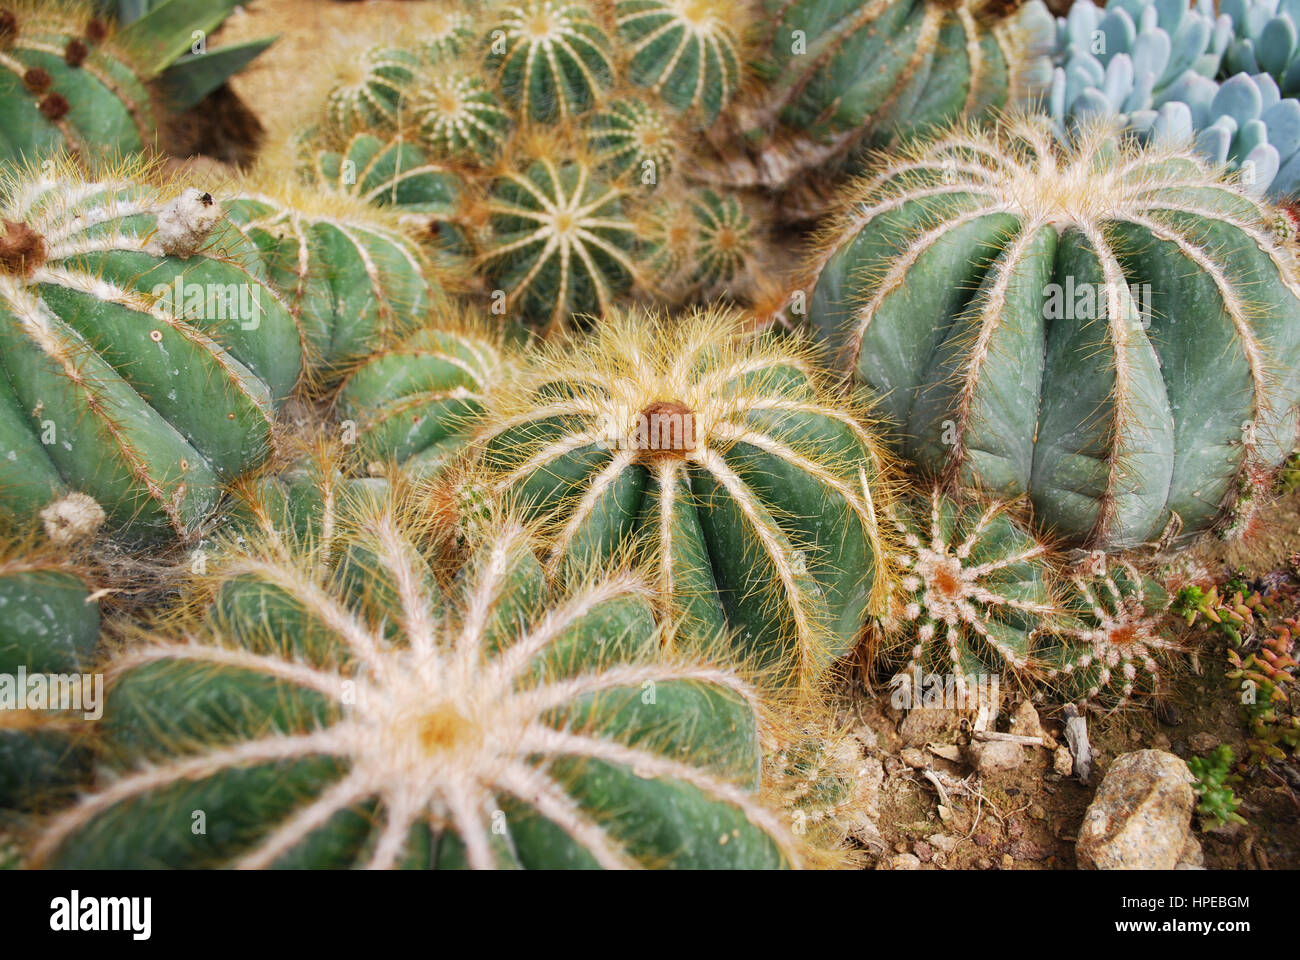 Parodia magnifica is a species of flowering plant in the Cactaceae family, native to southern Brazil. Stock Photo